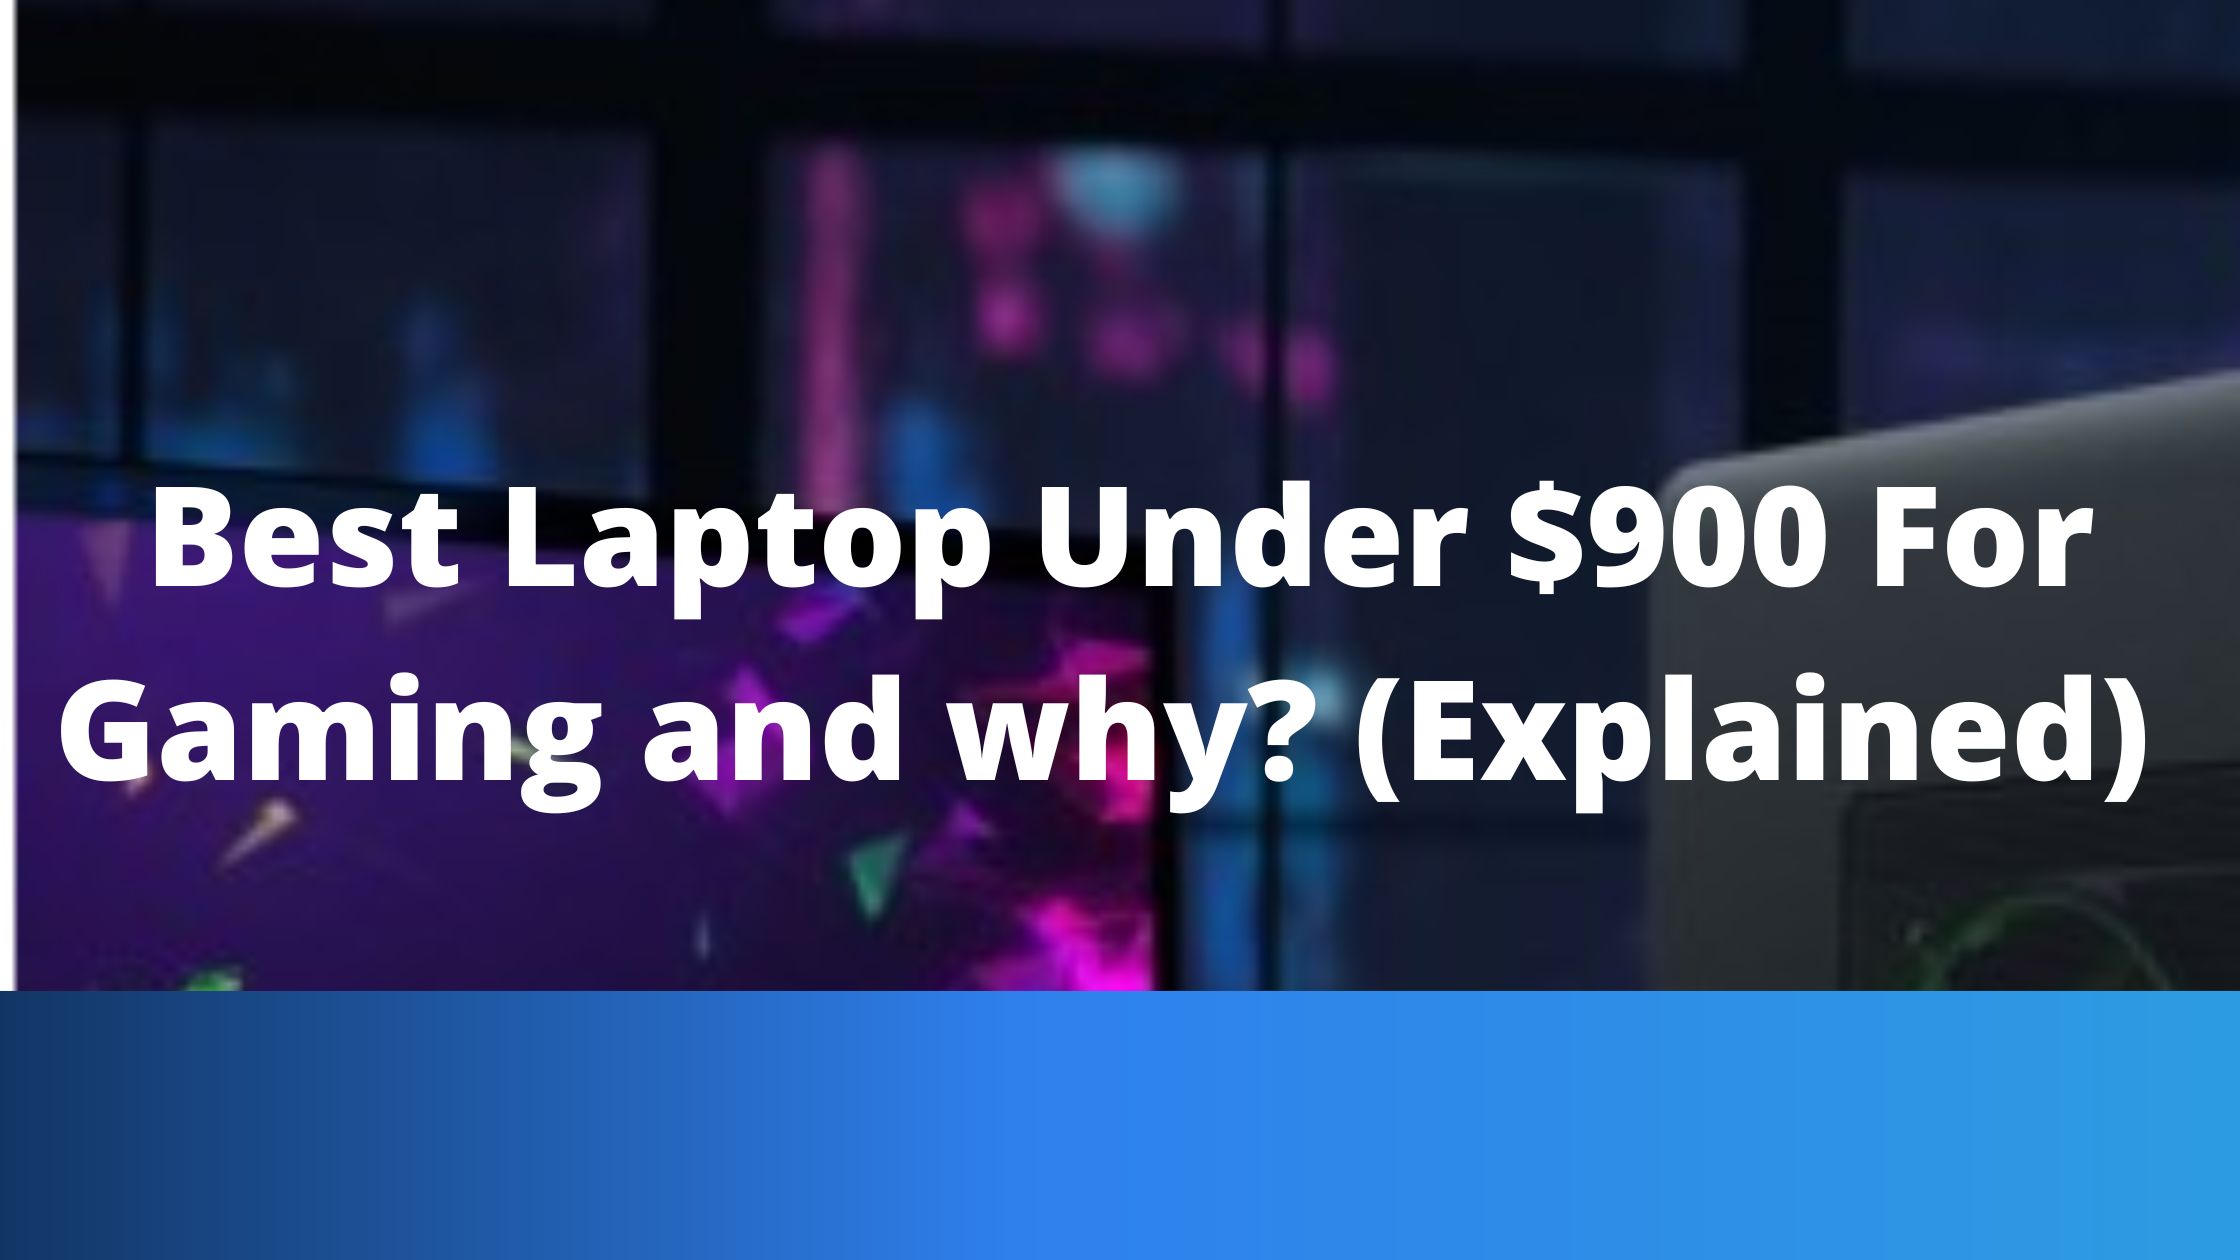 Best 4 Laptop Under $900 For Gaming and why? (Explained)